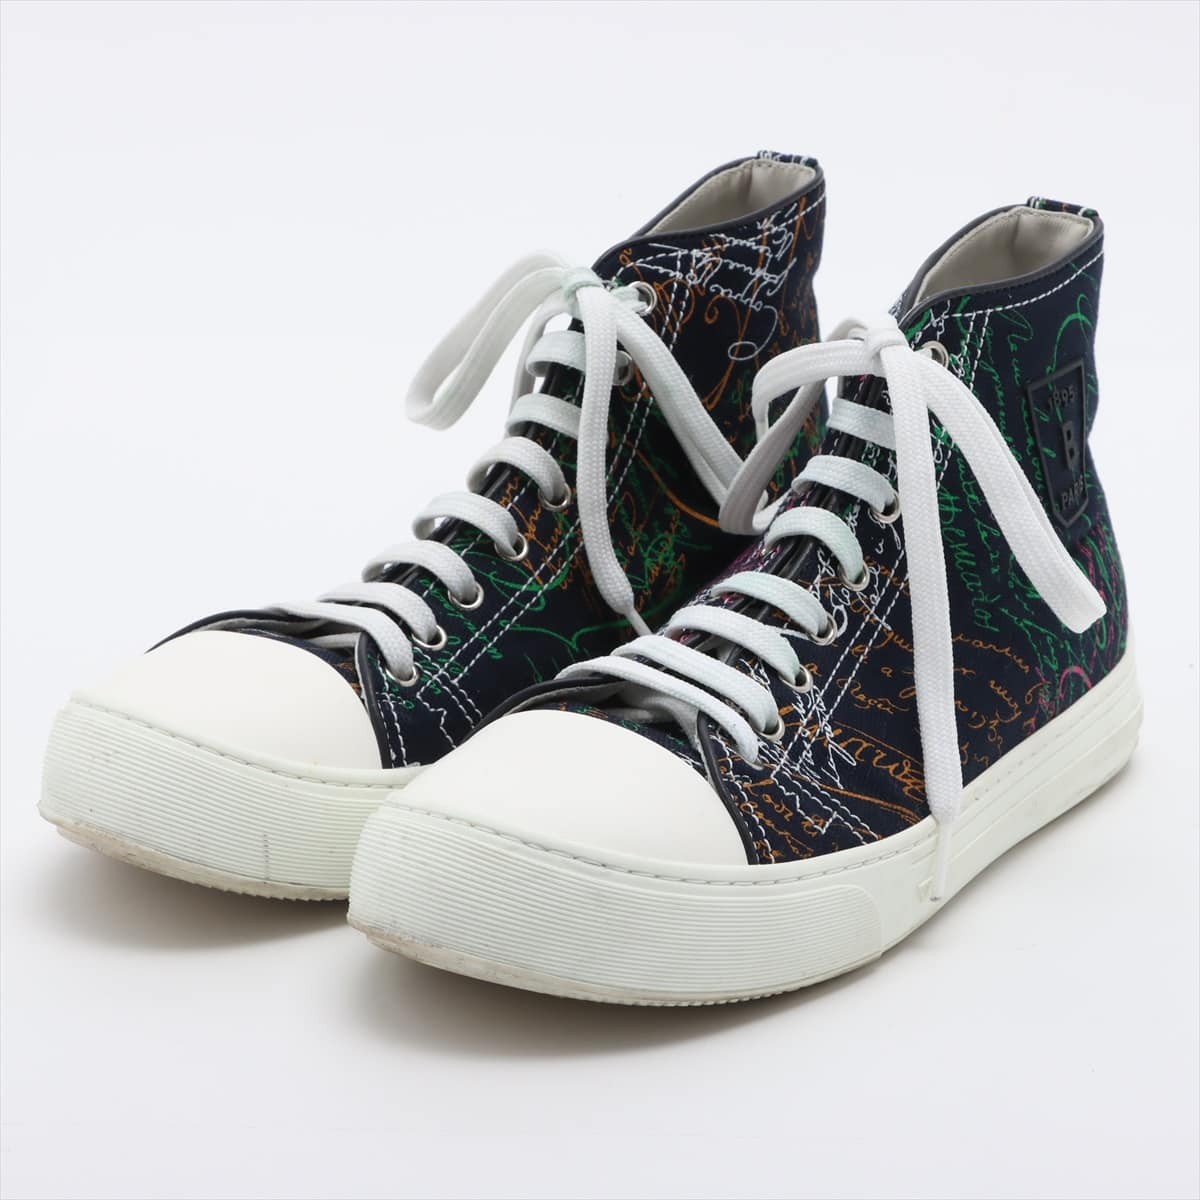 Berluti Canvas & leather High-top Sneakers 6 Men's Navy blue playgrounds 5040